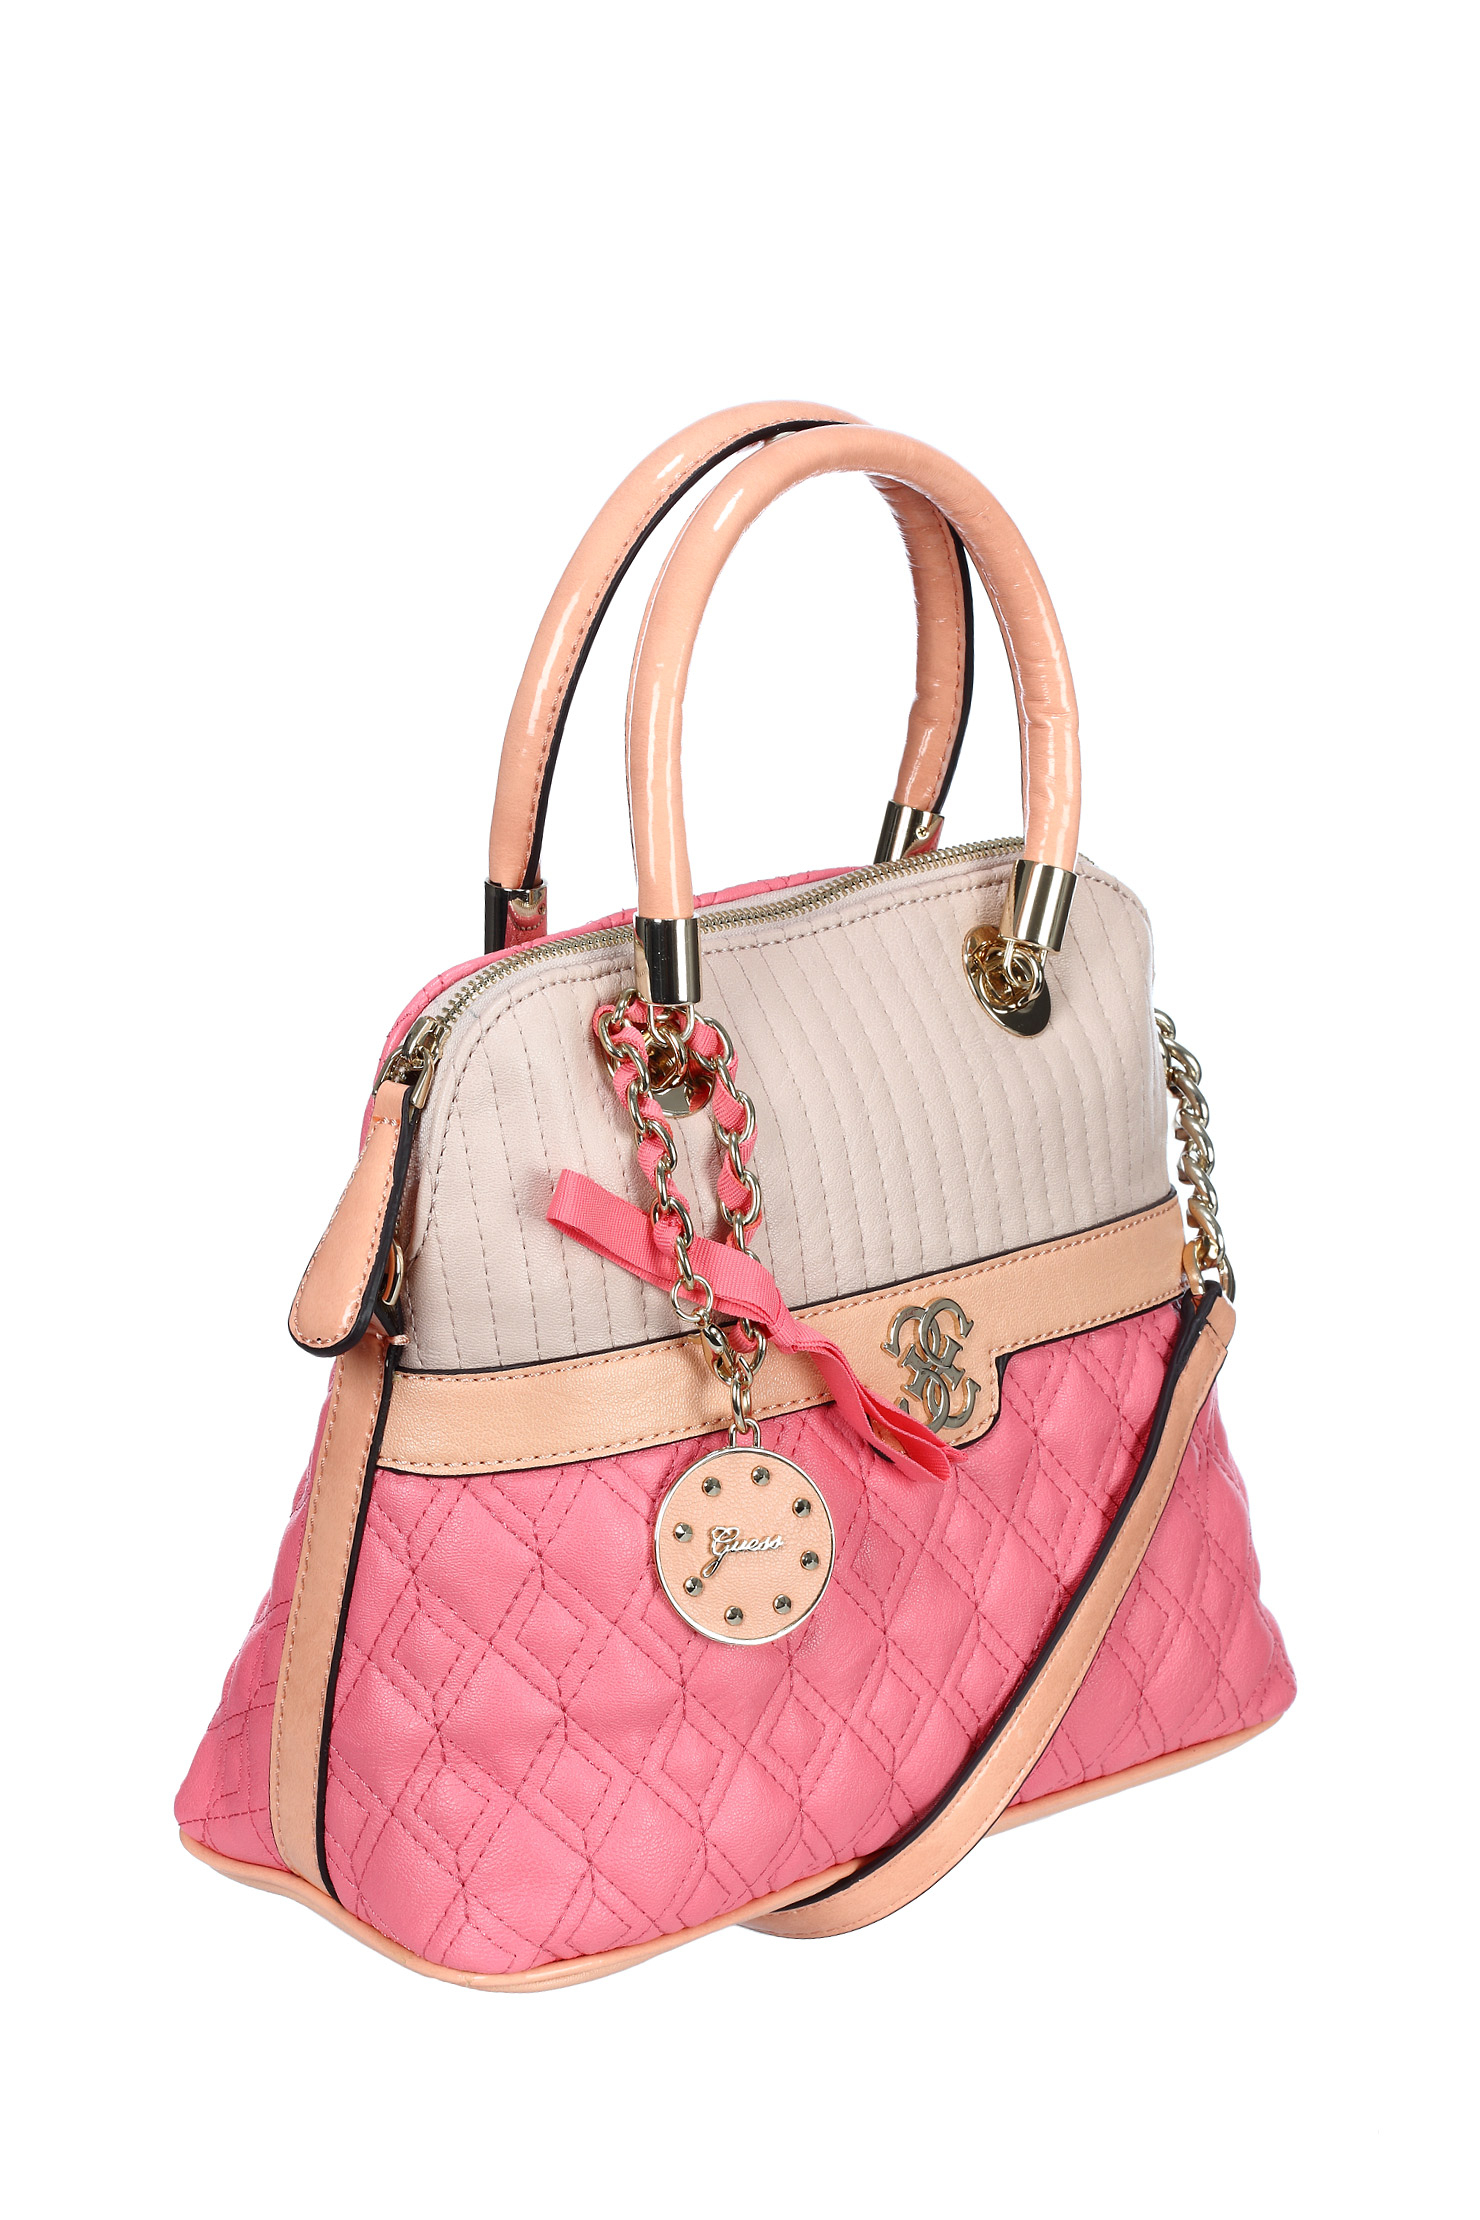 Lyst - Guess Town Bag Hwvg45 in Pink